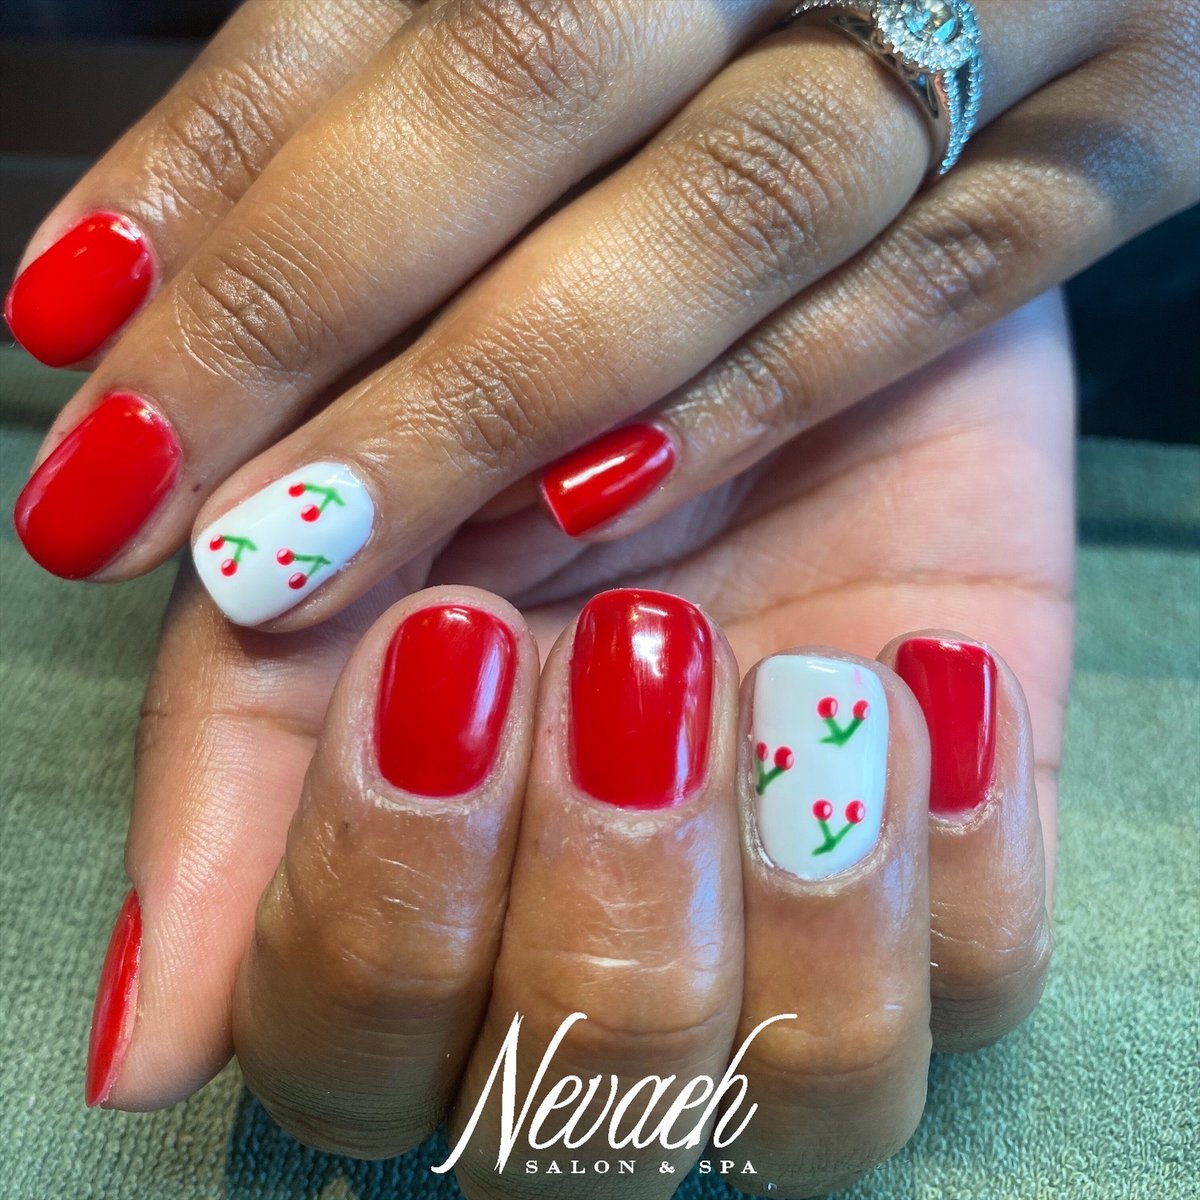 Sweet little cherries to go with the perfect cherry red polish!
Gel polish manicure by Courtney 🍒🍒

#nevaehsalonspa #nevaehsalonspaminerva
#nailsnailsnails #nailedit #nailart #nailartist 
#nailtrends #cutenails #nailwow #naildesign 
#minervanails #minervasalon #ohionails